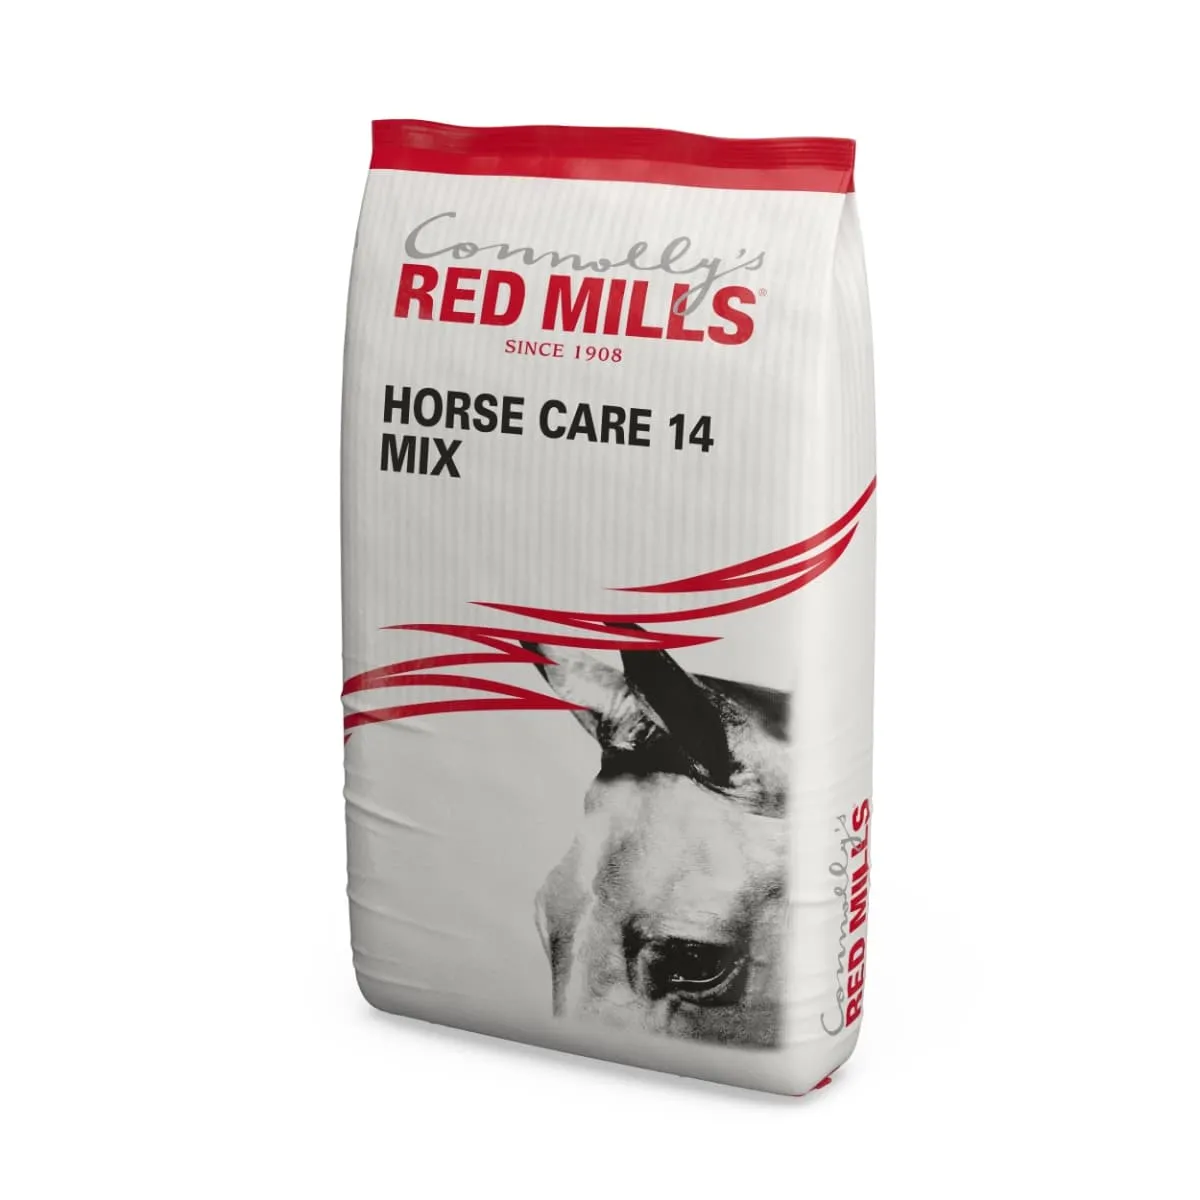 RED MILLS Horse Care 14 Mix